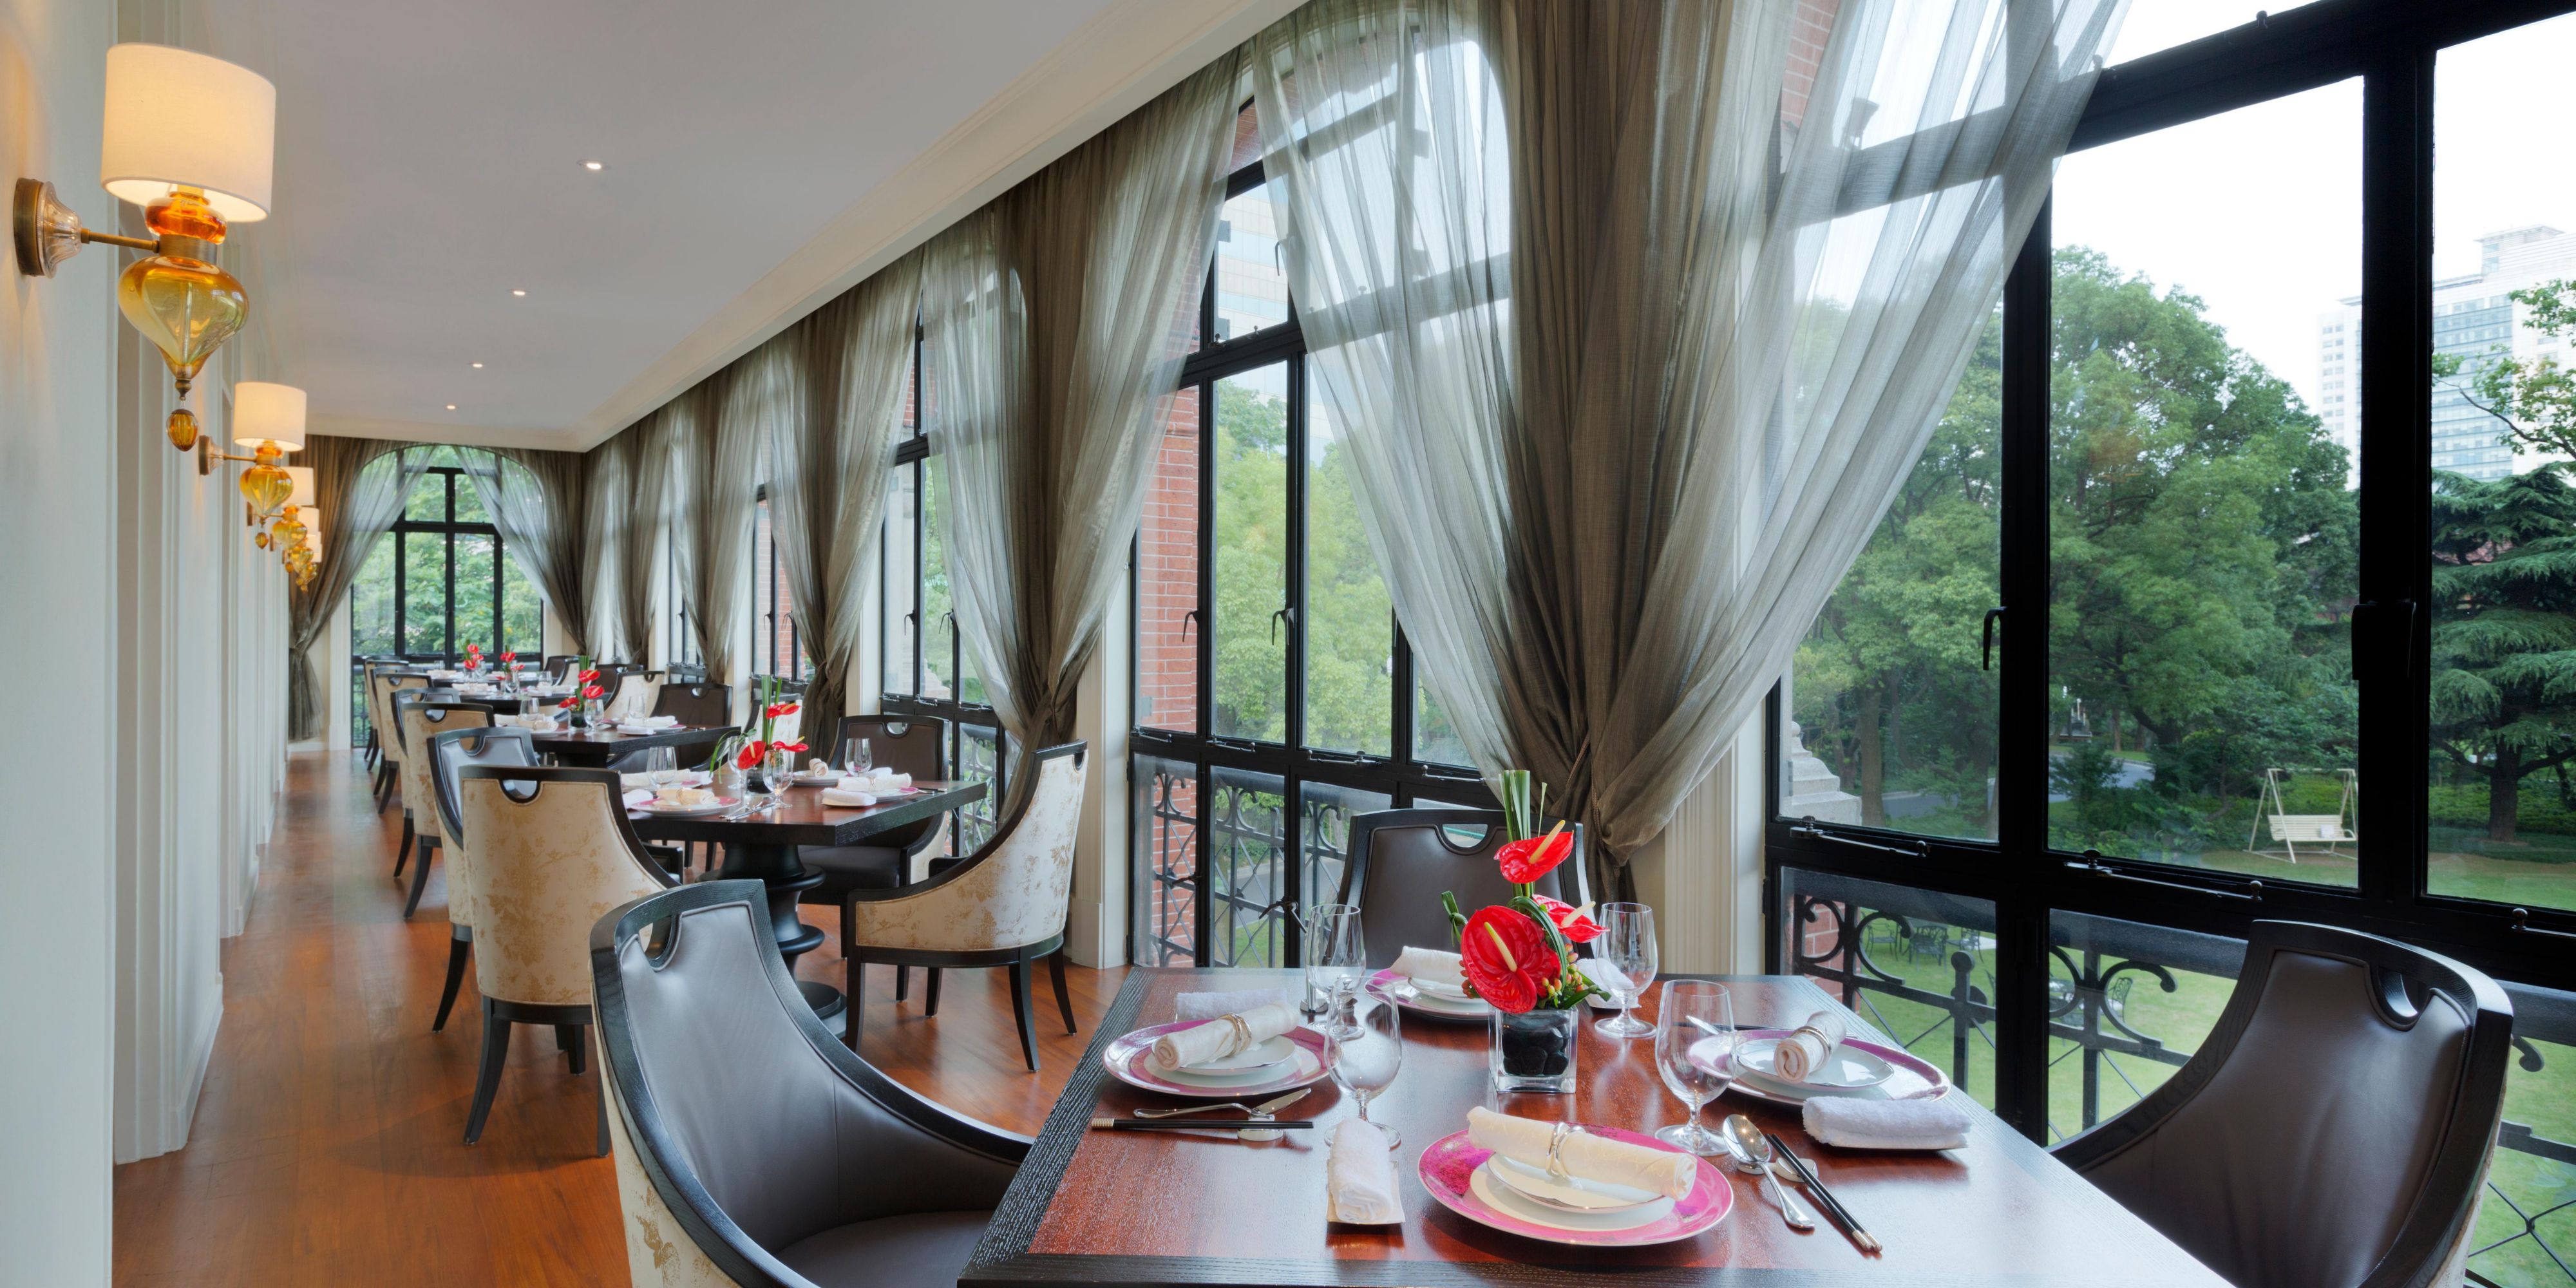 Xin Yuan Lou was built in 1930 and is now a three-story Chinese restaurant providing Cantonese and Shanghainese delicacies. The main dining room plus eight private dining suites up to 35 guests. Themed private dining suites feature distinctive designs which highlight Chinese culture.